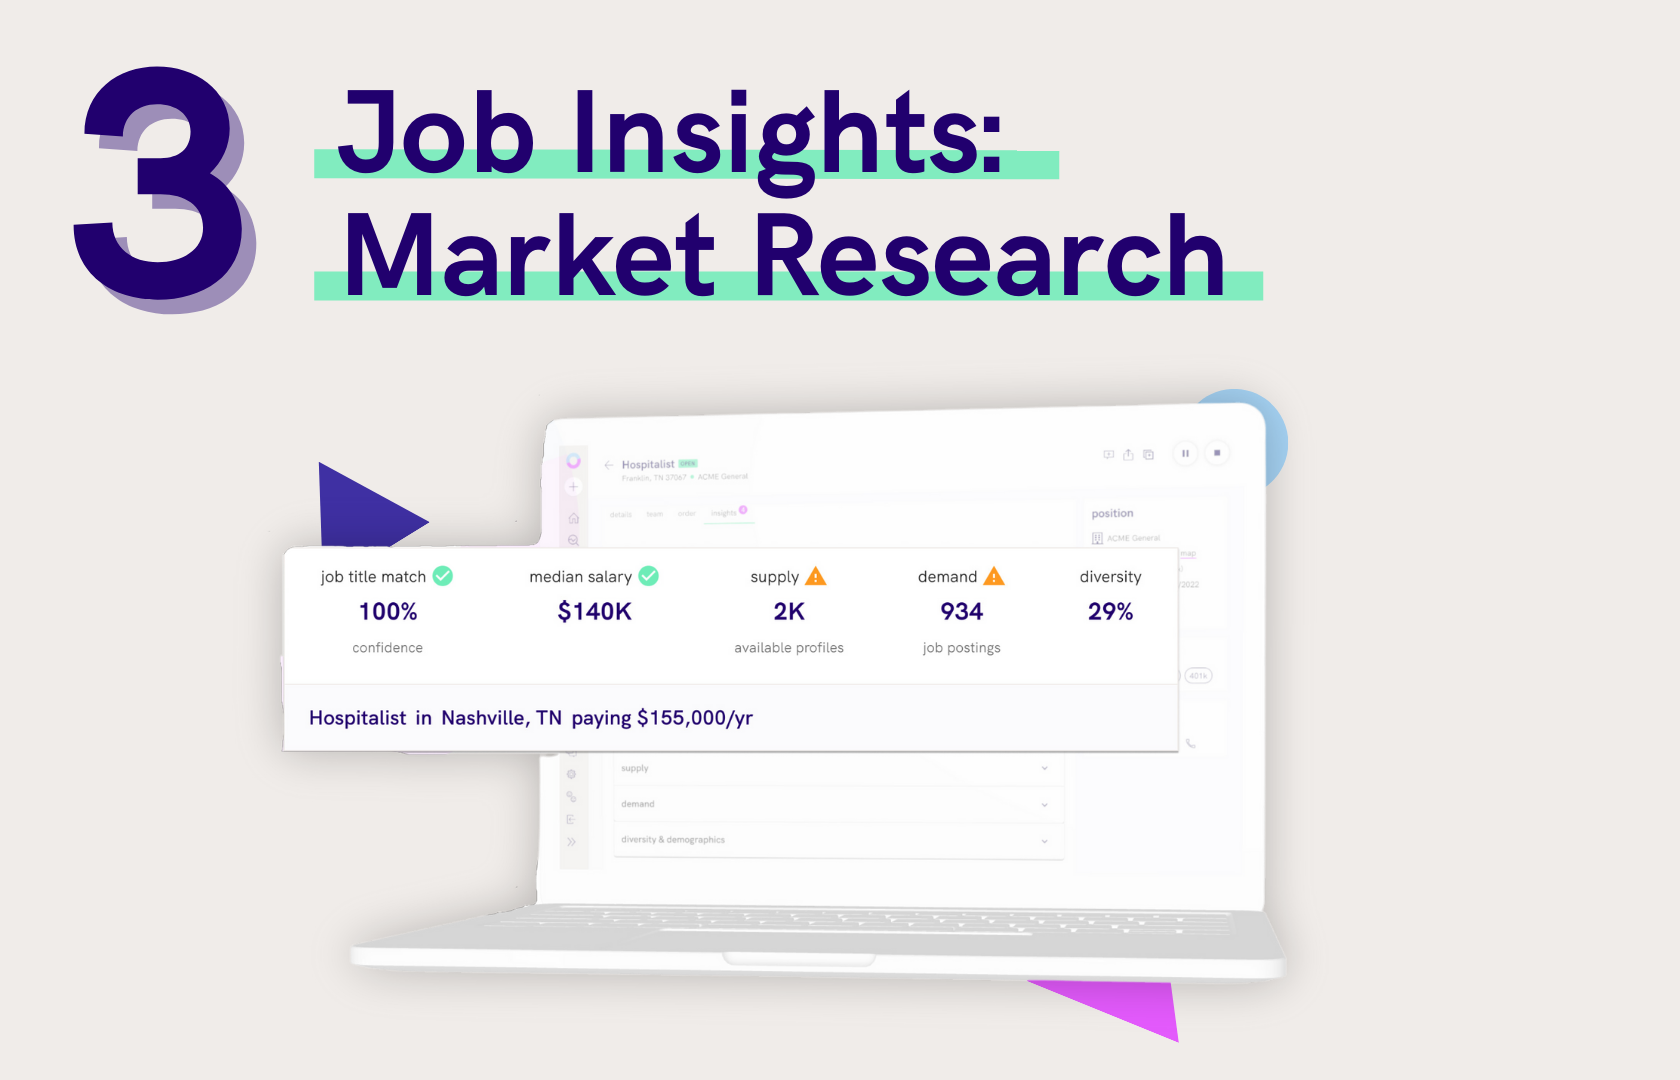 Job insights give clients access to labor market research